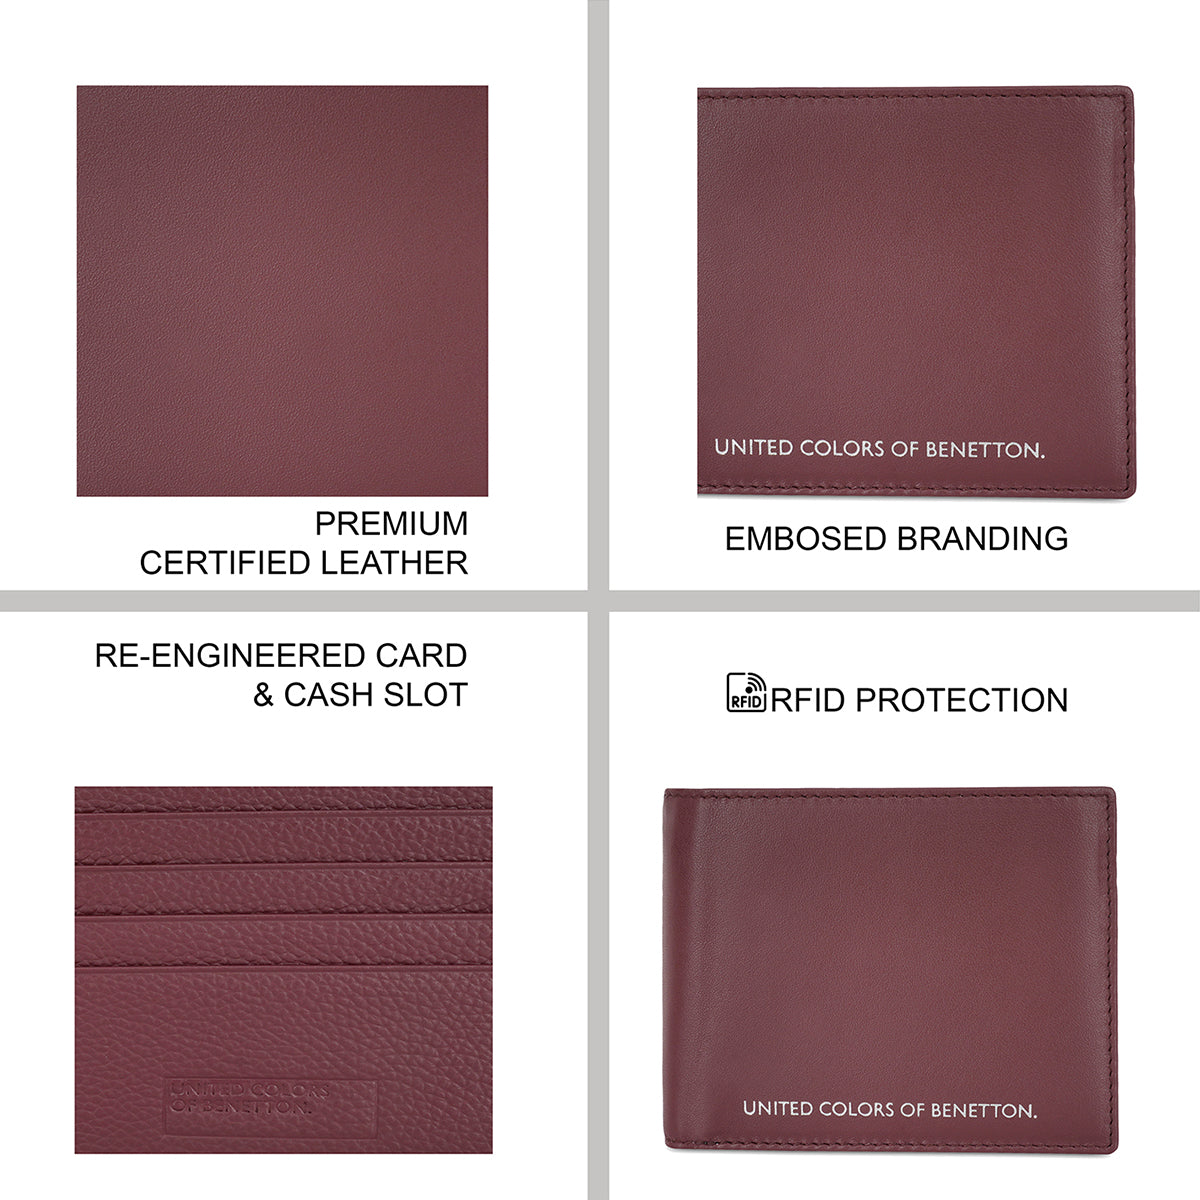 United Colors of Benetton Aelger Passcase Wallet Wine